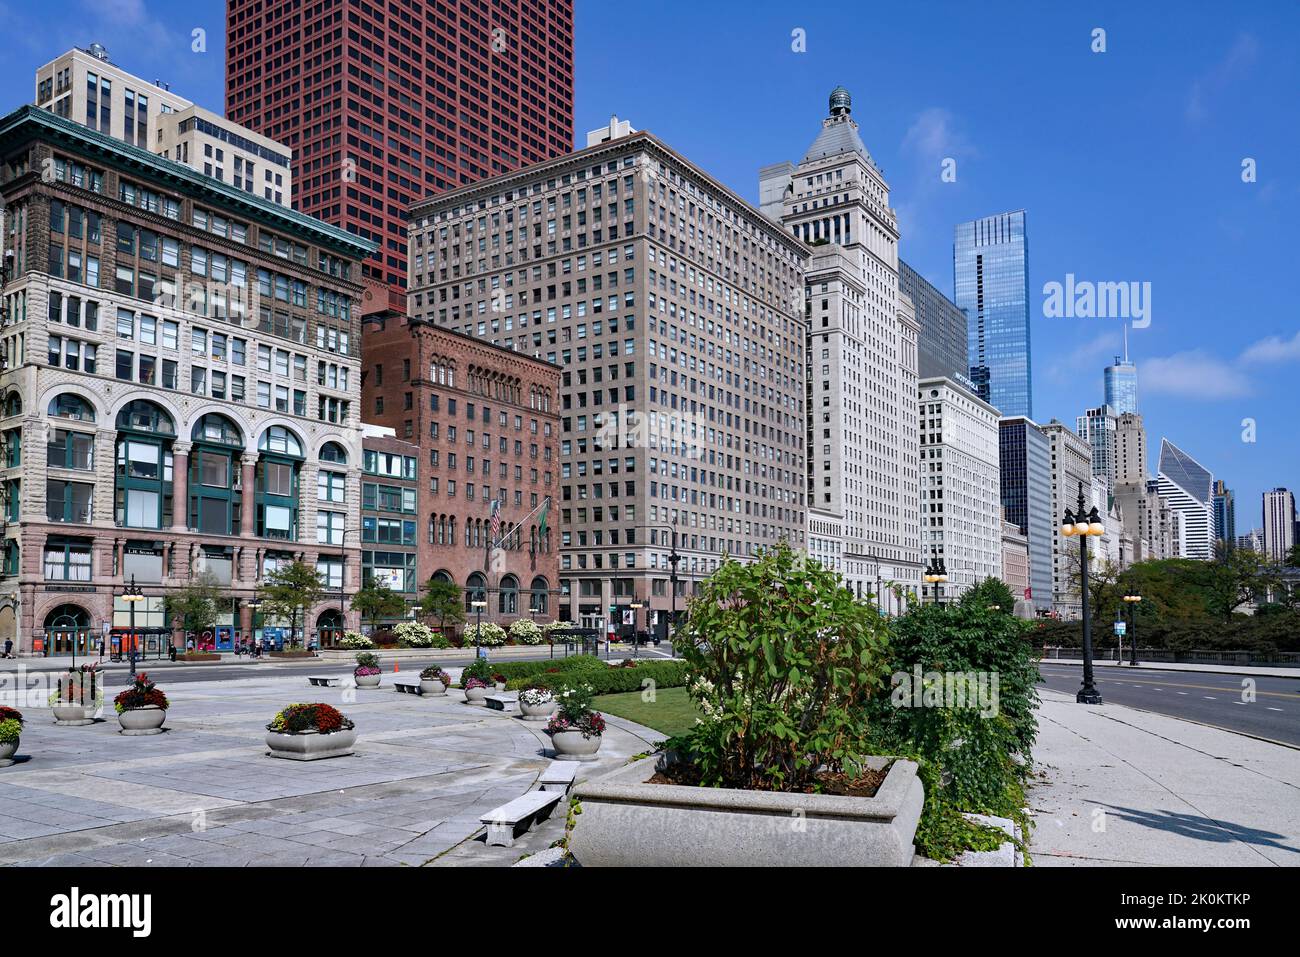 Chicago, looking north on Michigan Avenue from Congress Plaza, with a mix of traditional and modern architecture Stock Photo